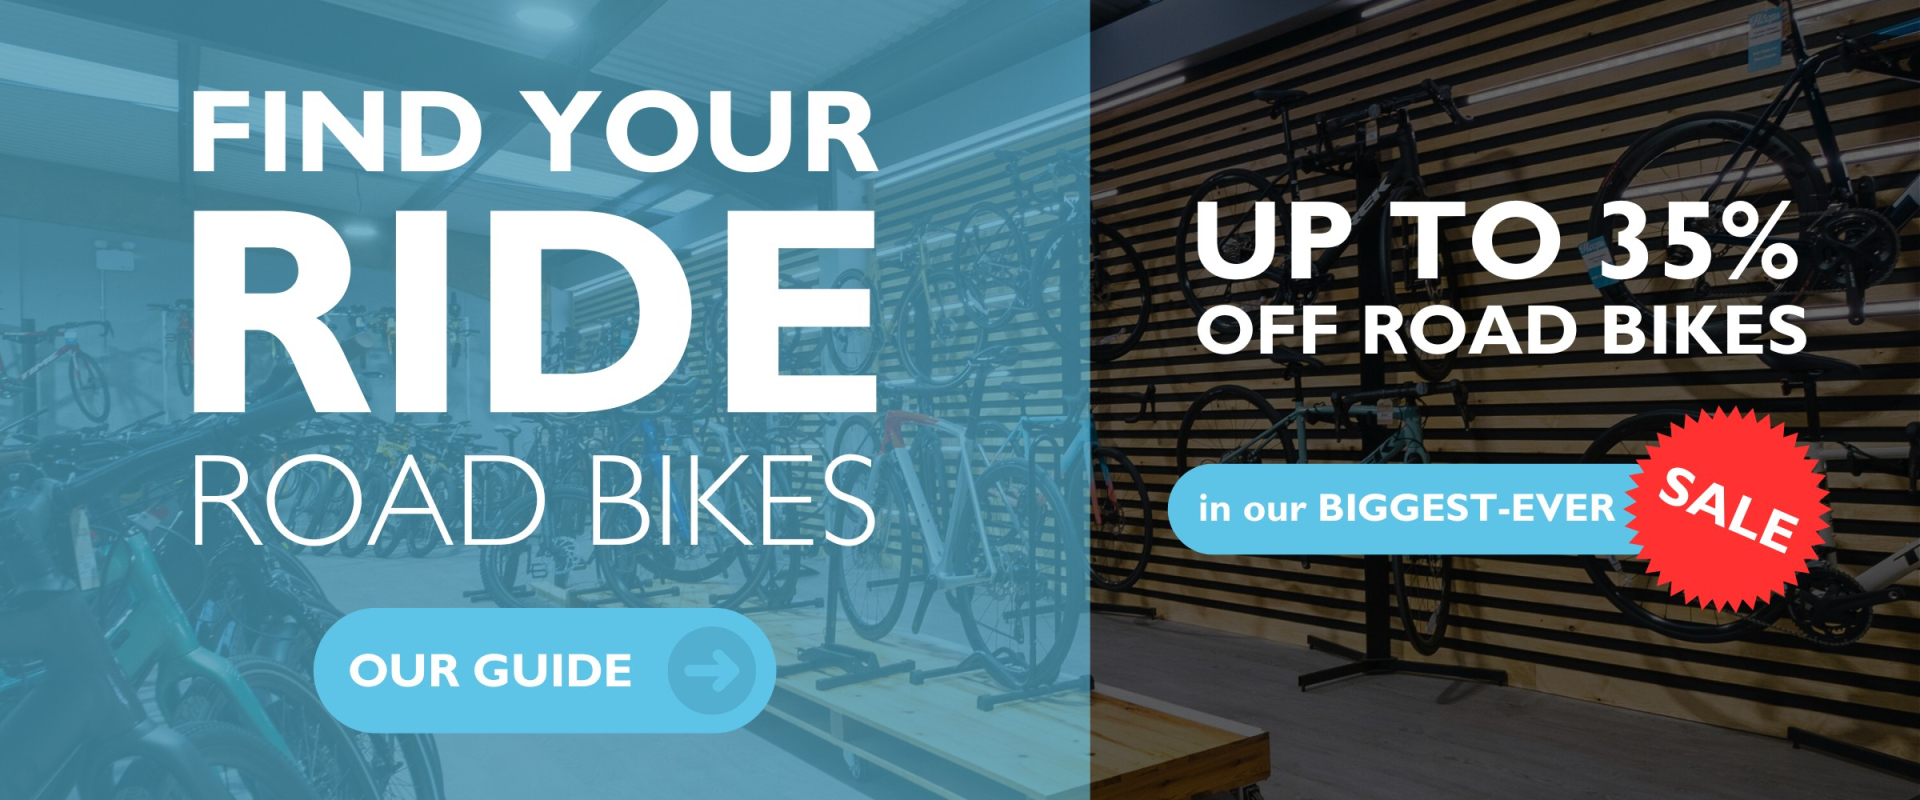 Find Your Ride: Road Bikes